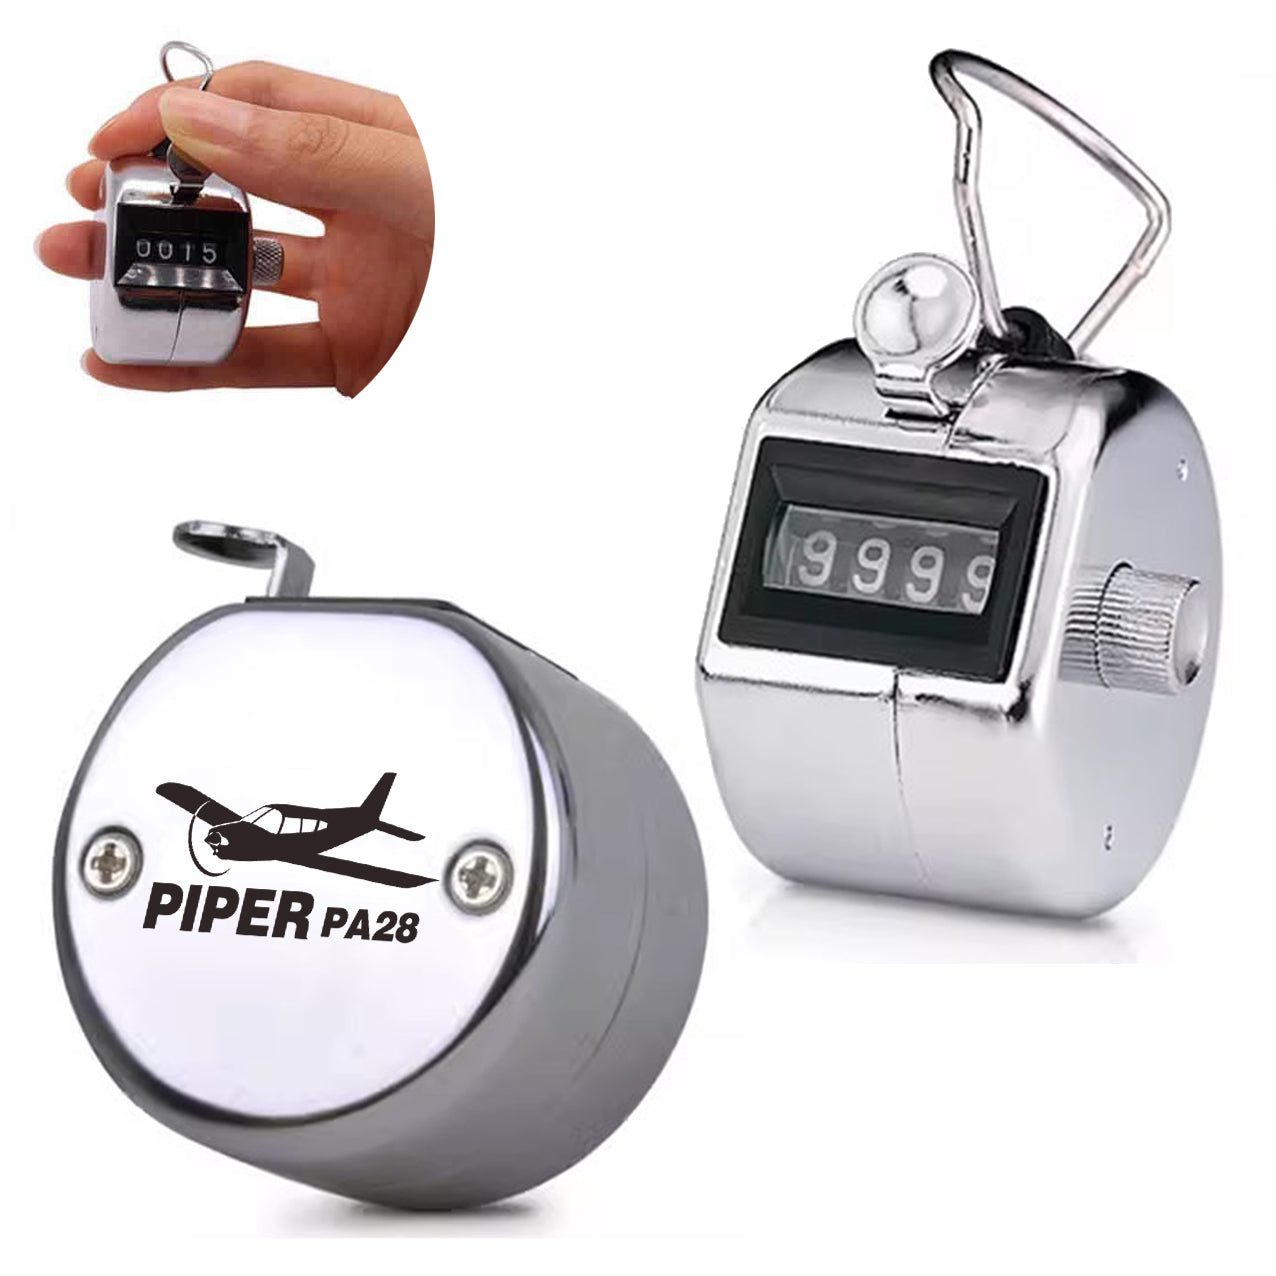 The Piper PA28 Designed Metal Handheld Counters